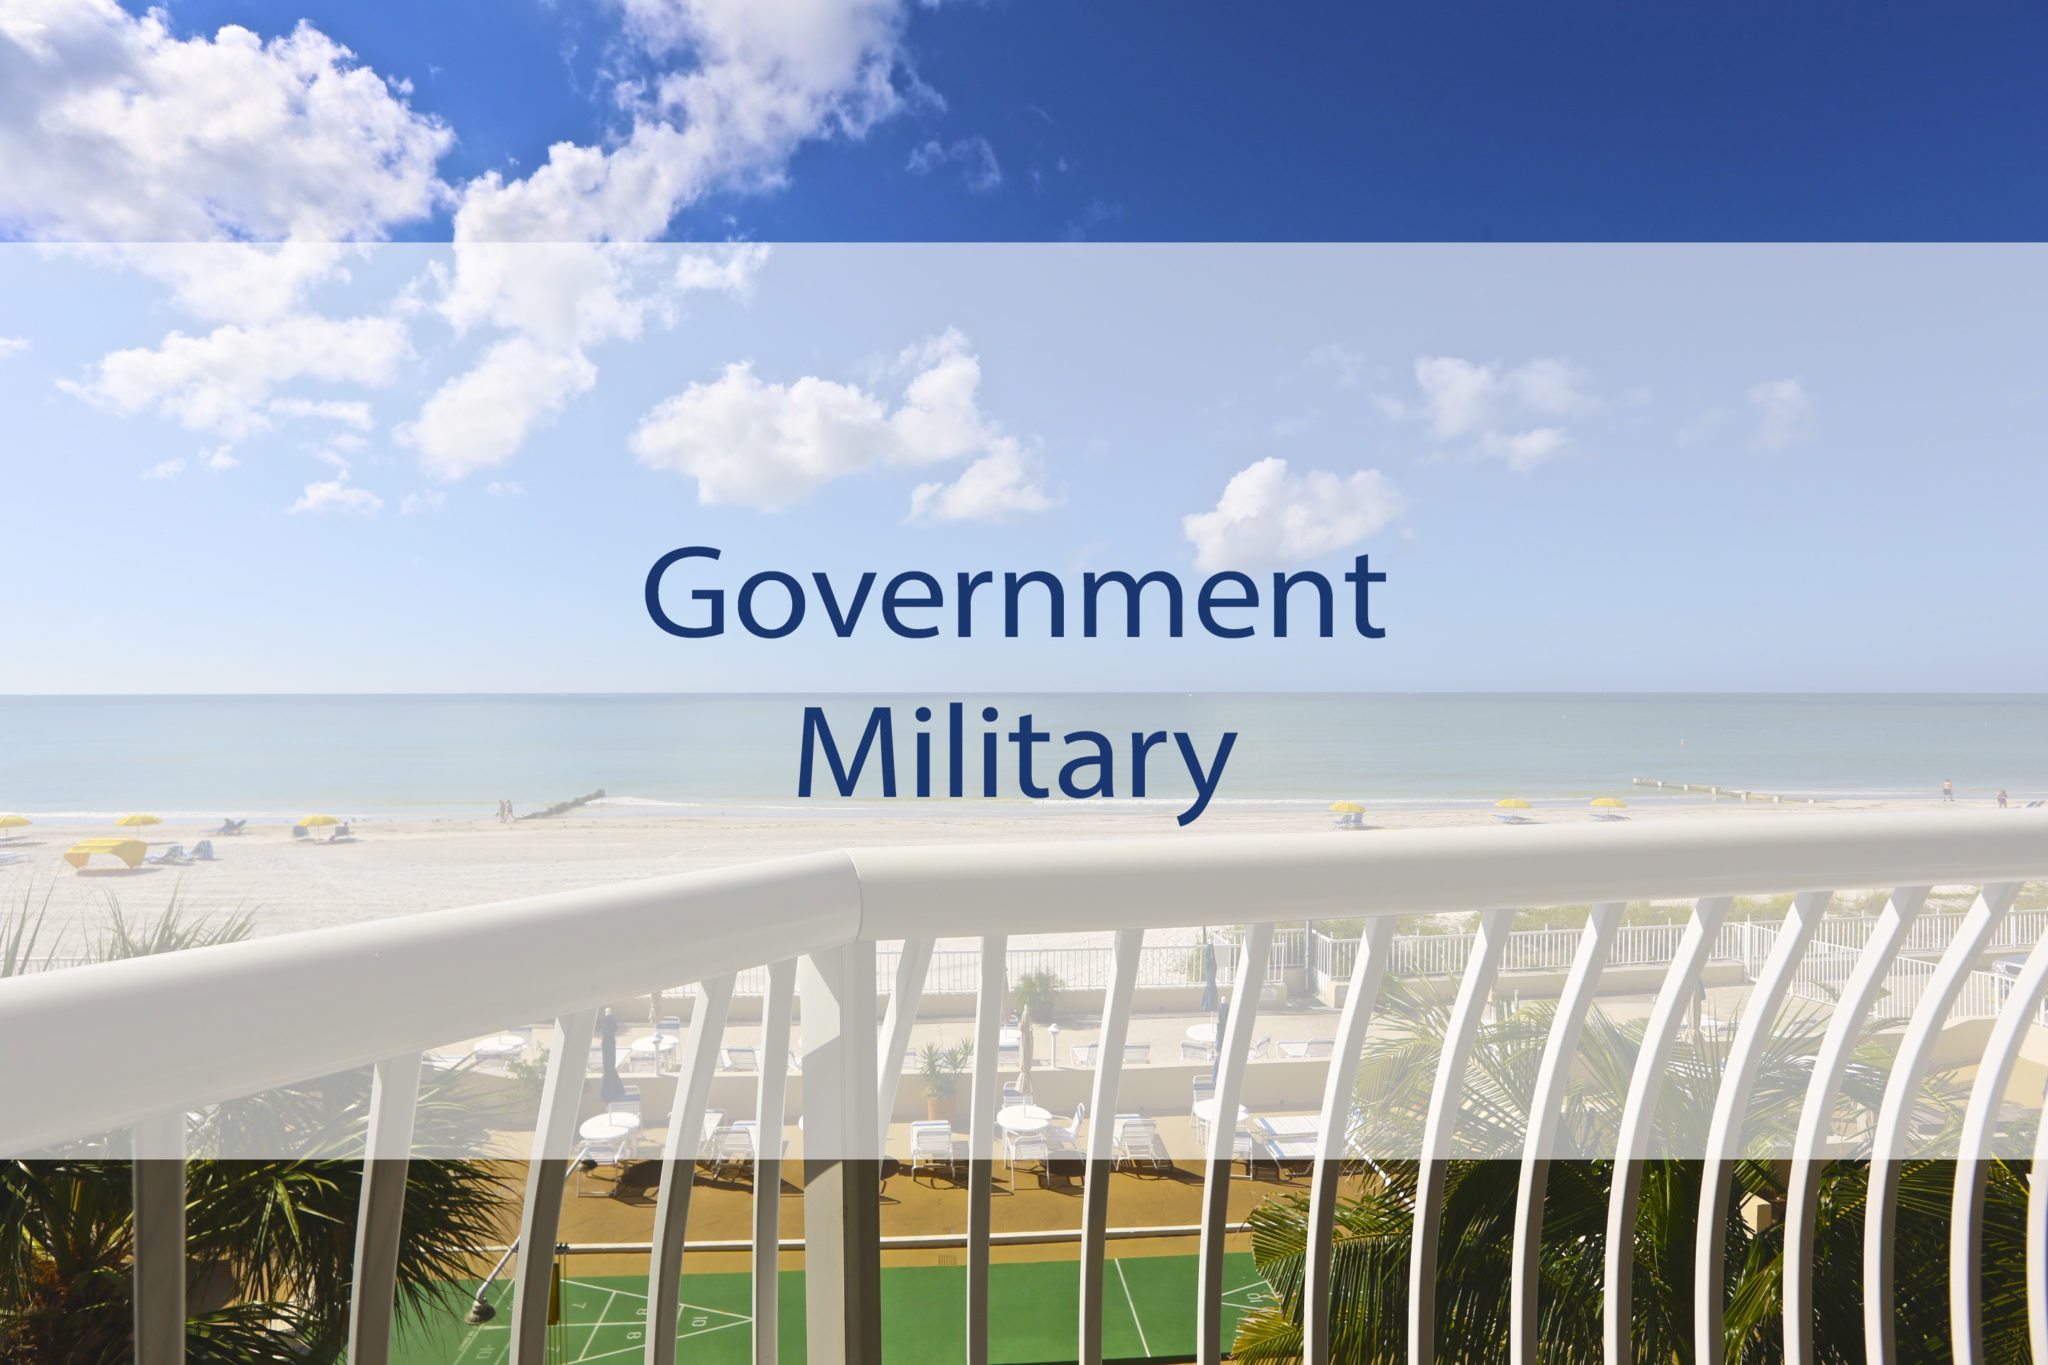 Government / Military